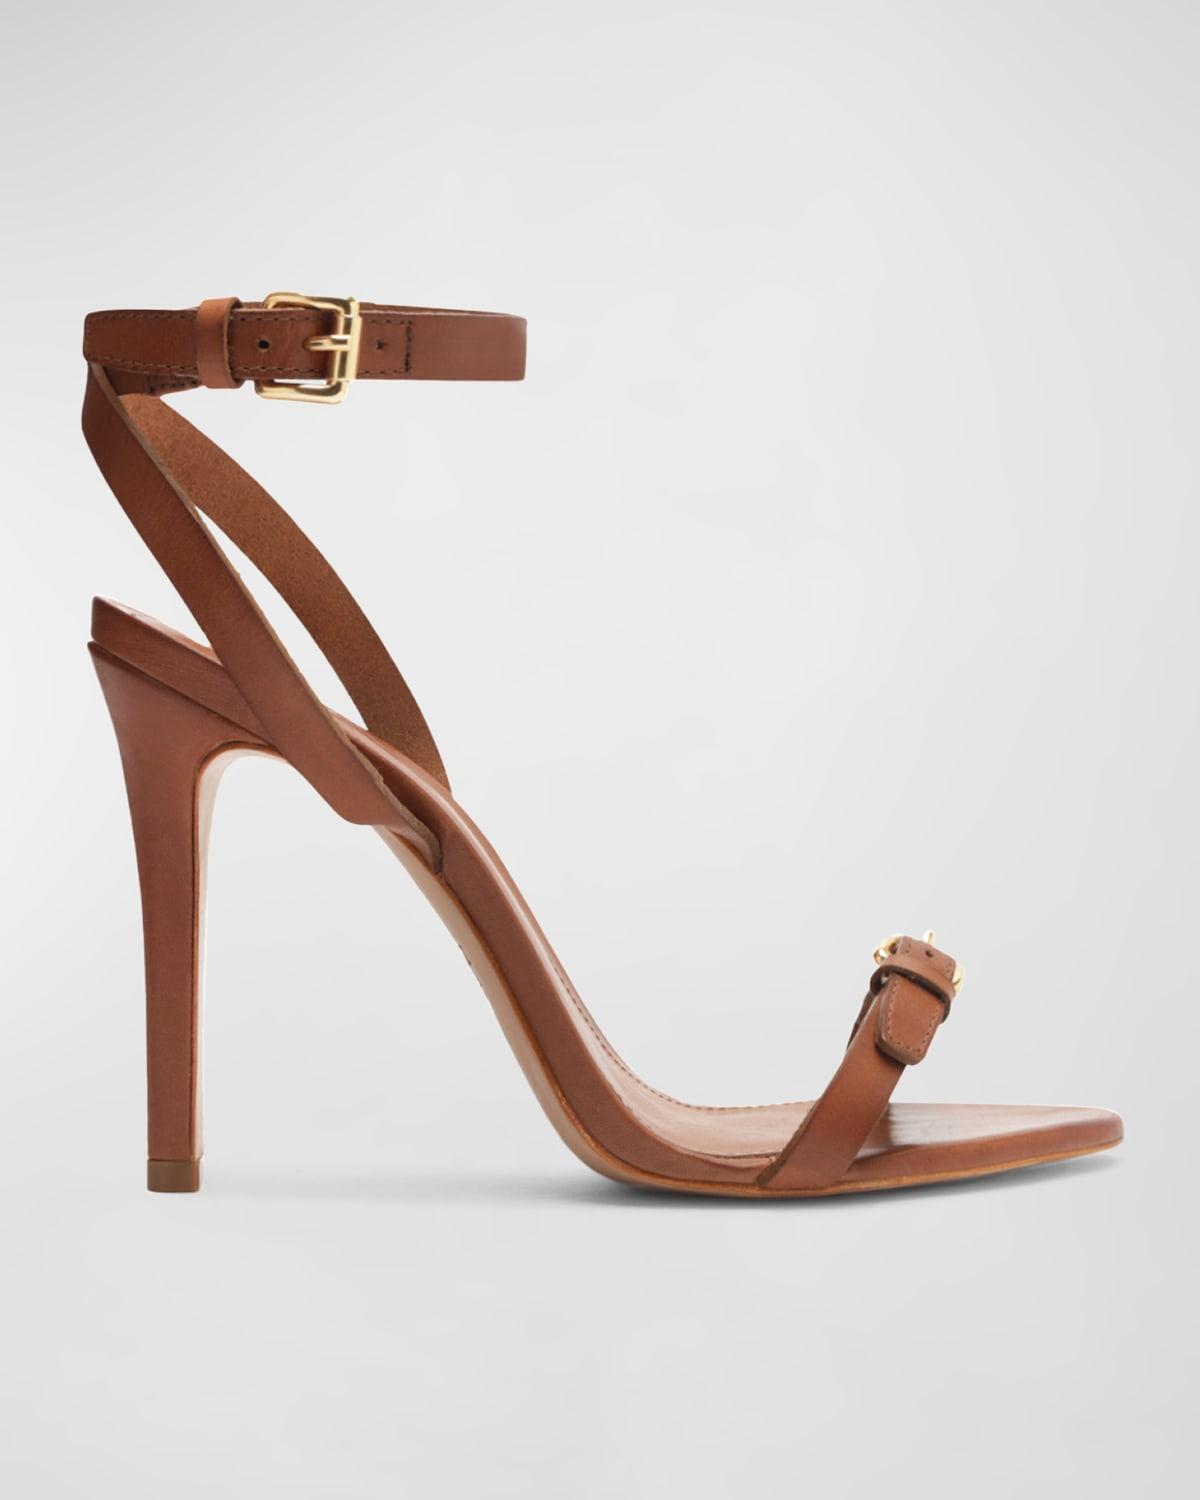 Aurora Buckle Leather Stiletto Sandals Product Image